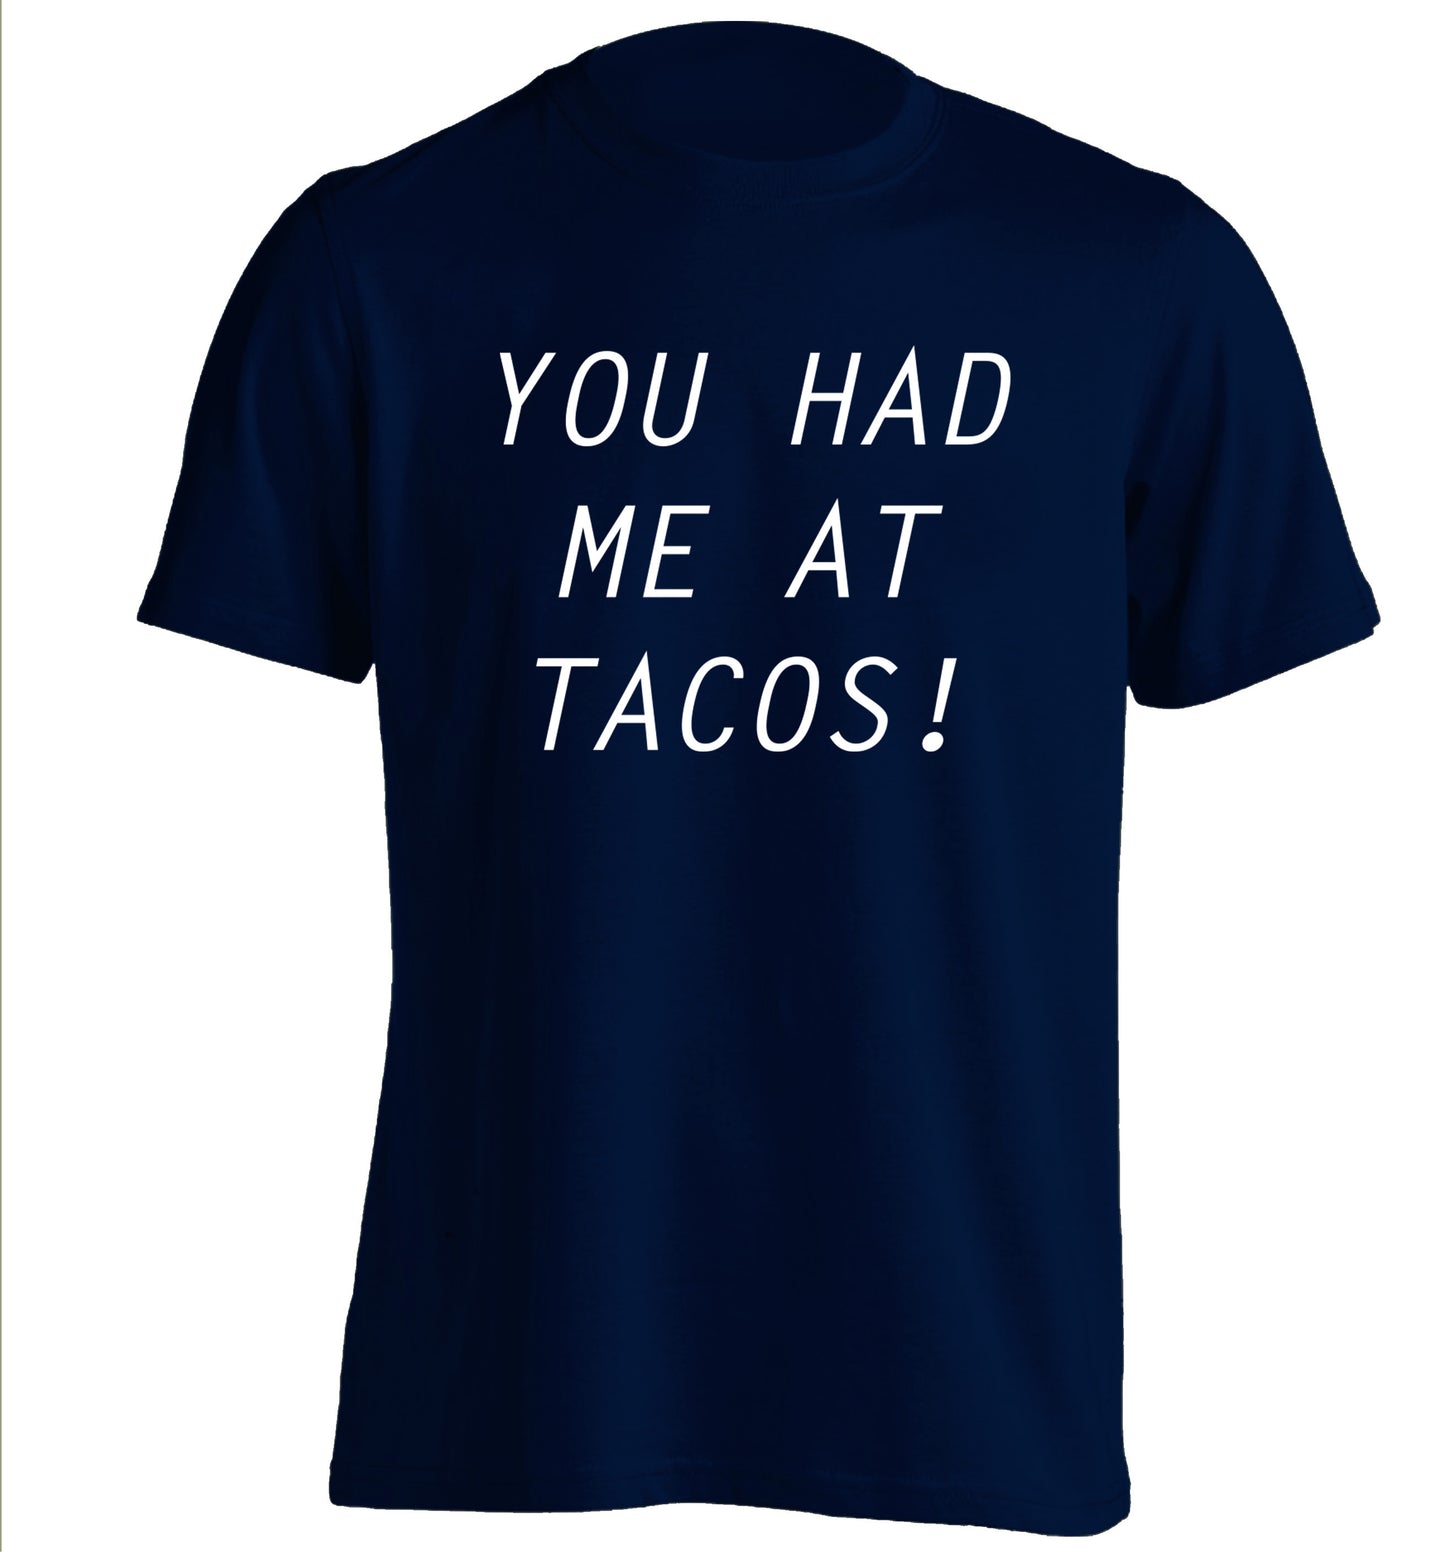 You had me at tacos adults unisex navy Tshirt 2XL